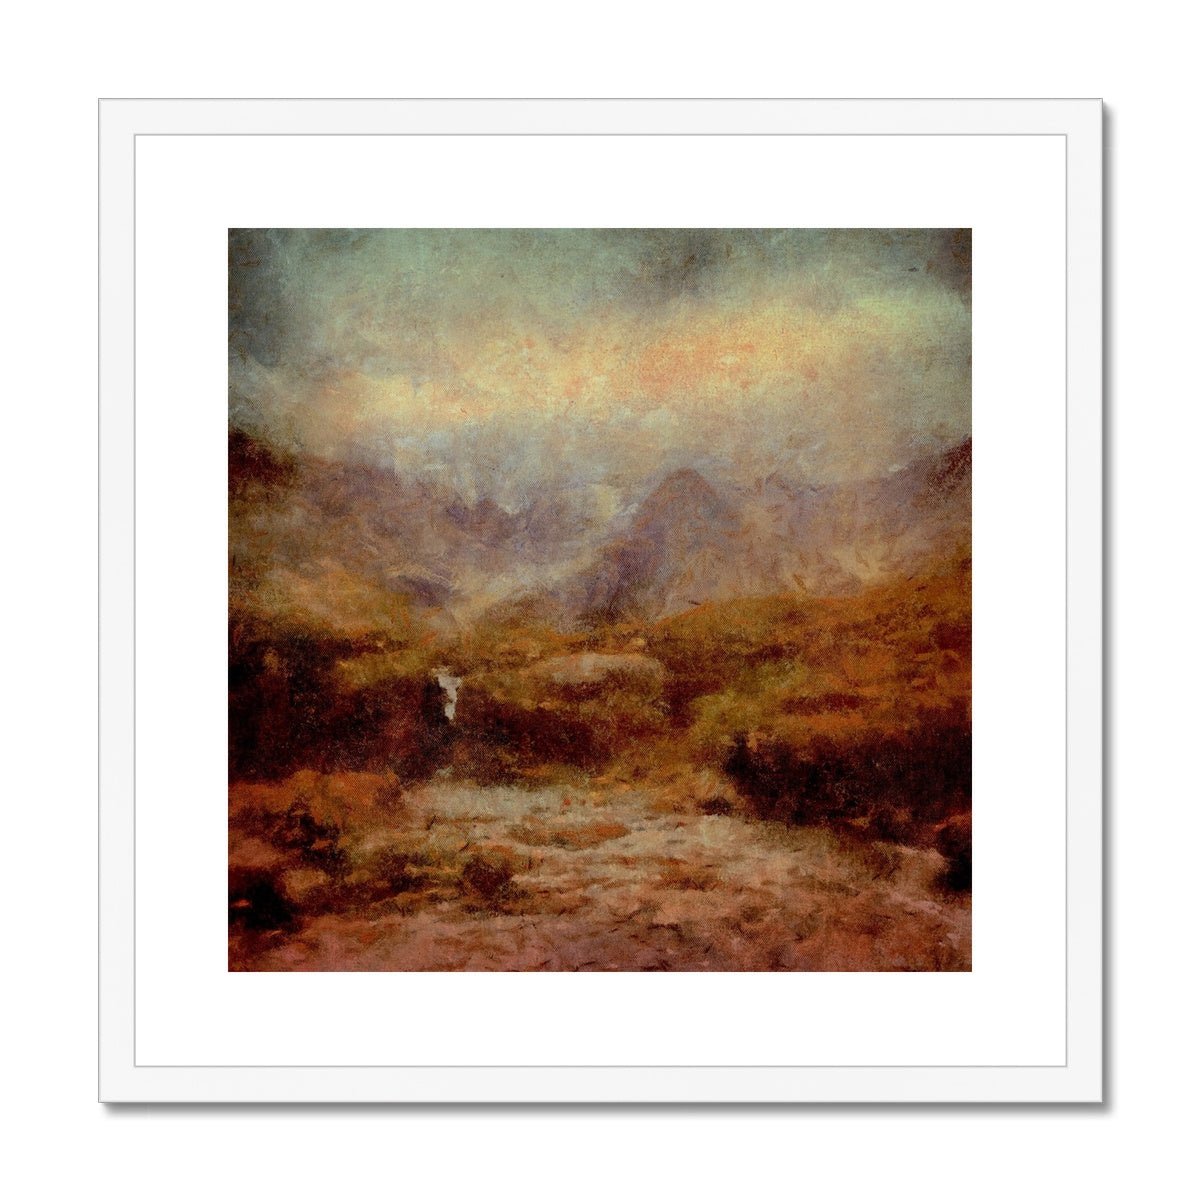 The Brooding Fairy Pools Skye Painting | Framed & Mounted Prints From Scotland-Framed & Mounted Prints-Skye Art Gallery-20"x20"-White Frame-Paintings, Prints, Homeware, Art Gifts From Scotland By Scottish Artist Kevin Hunter